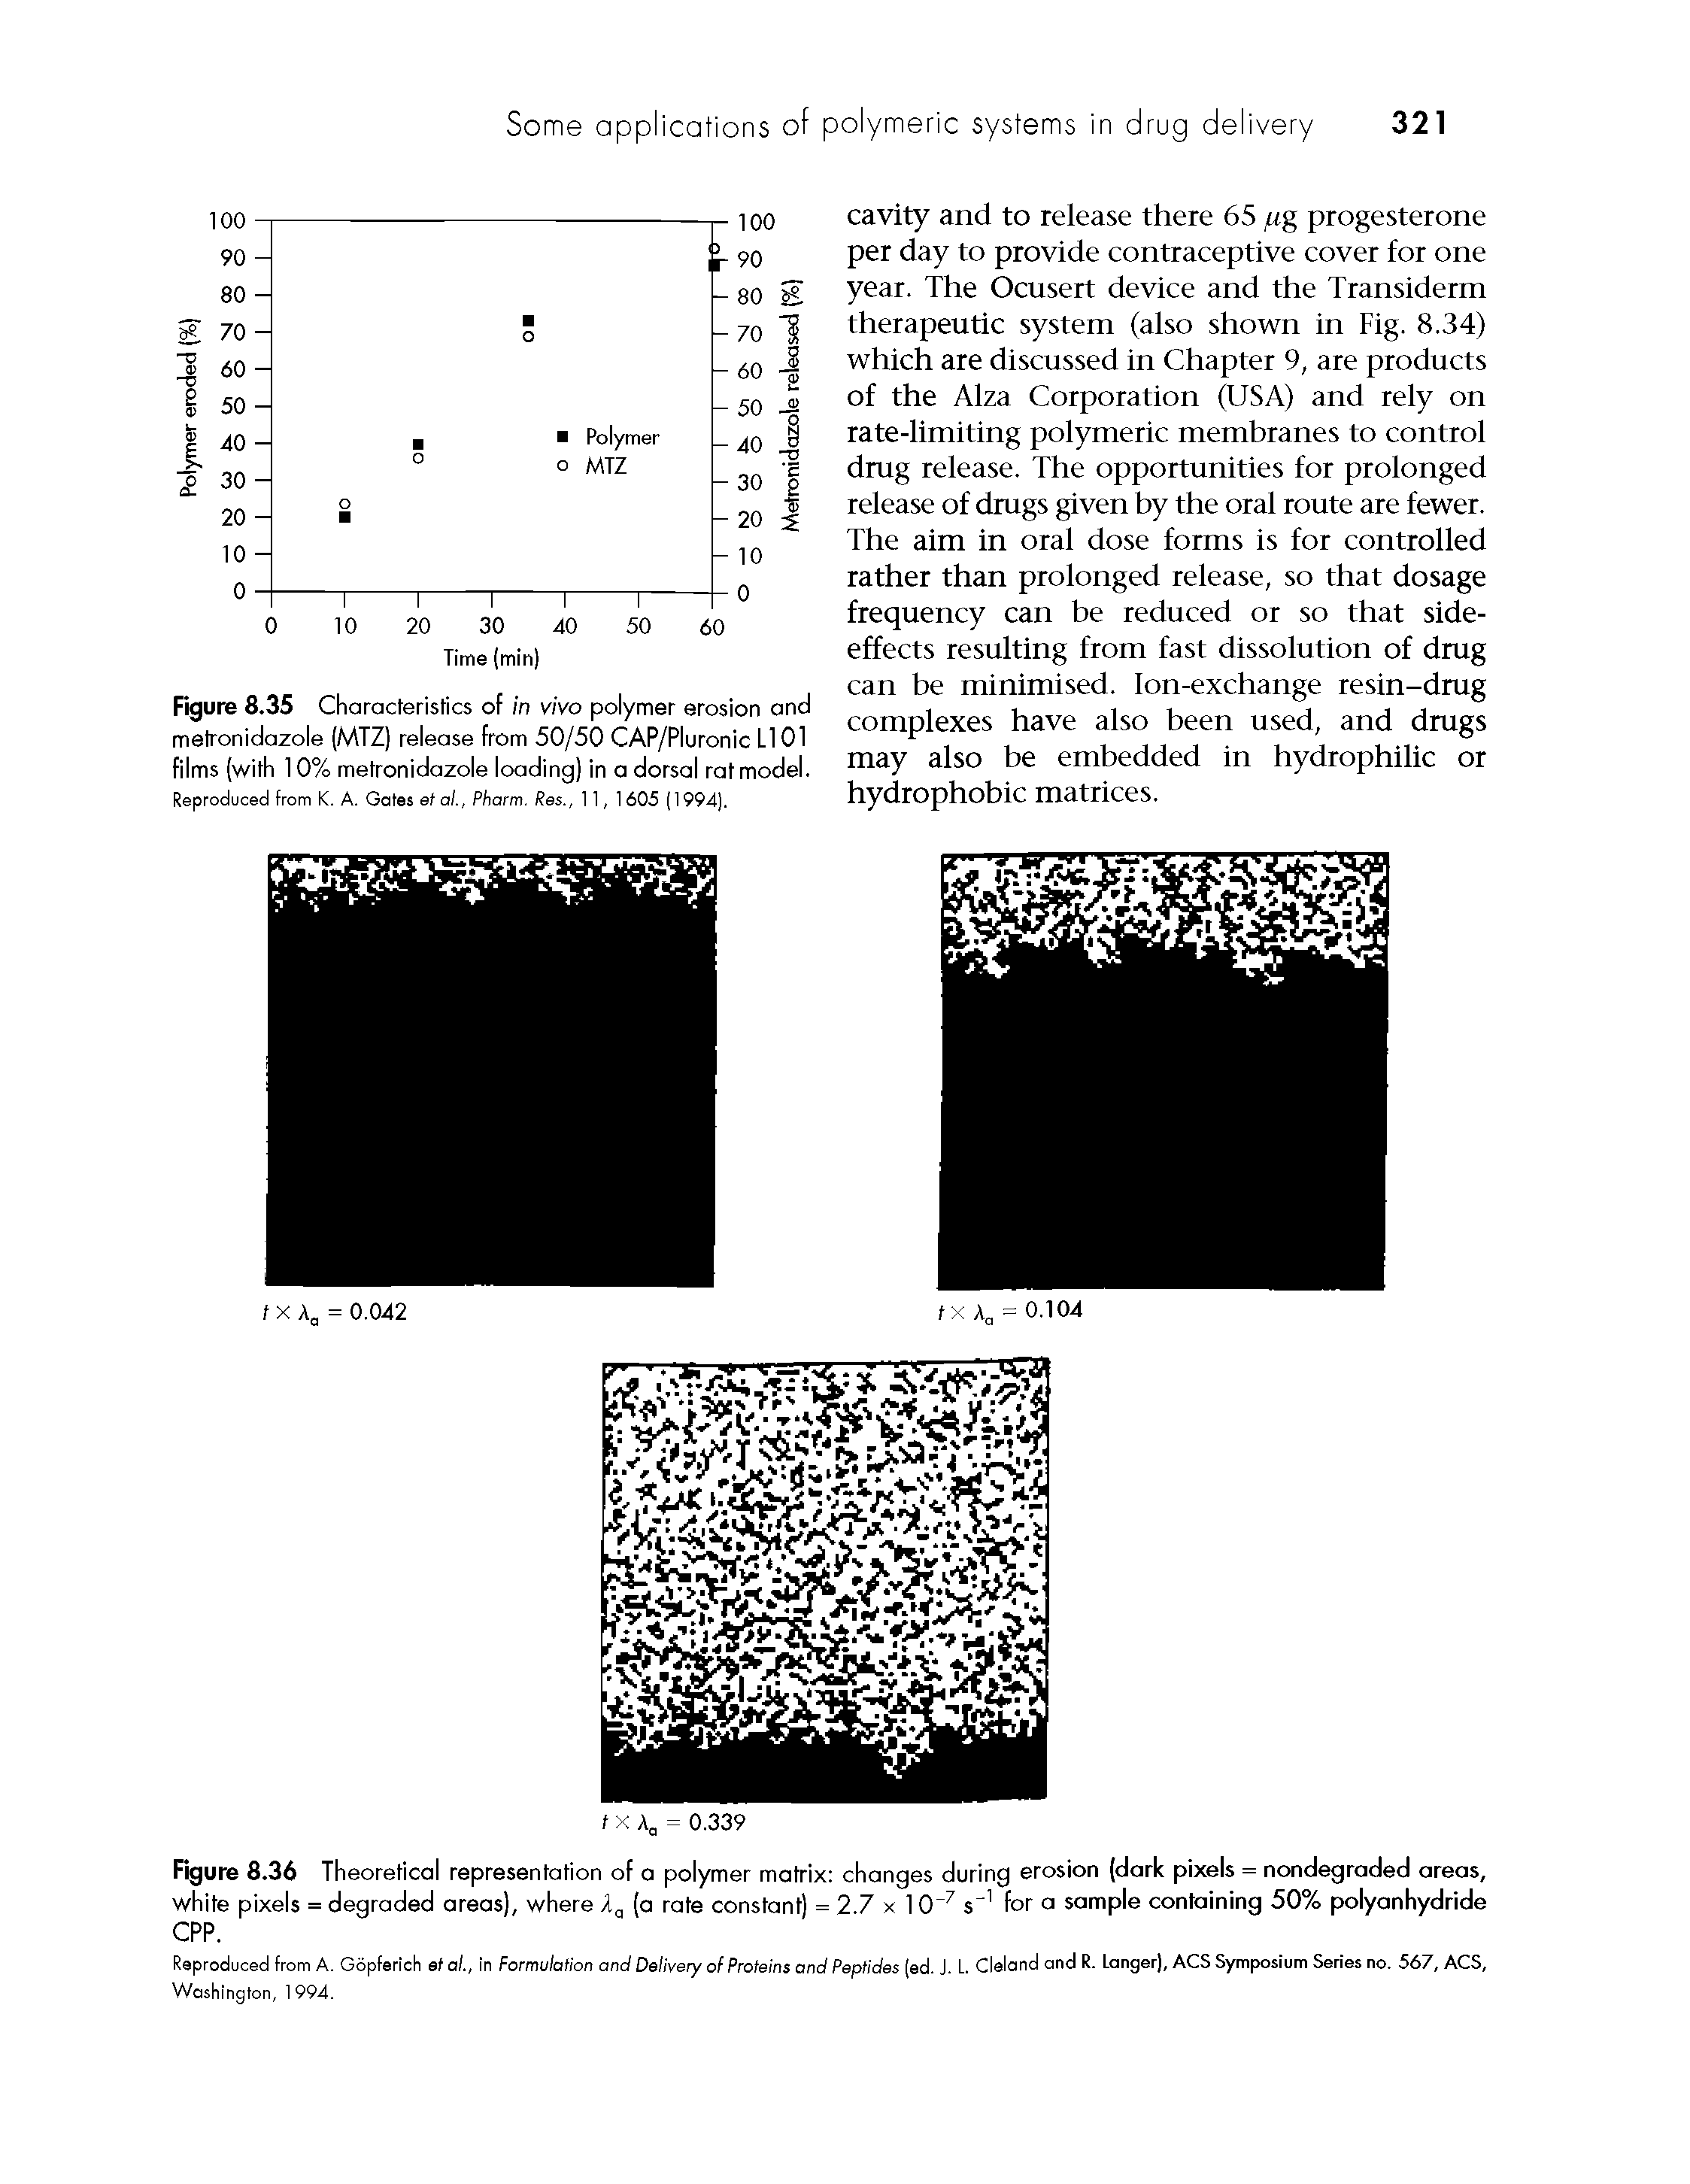 Figure 8.36 Theoretical representation of a polymer matrix changes during erosion (dark pixels = nondegraded areas, white pixels = degraded areas), where (a rate constant) = 2.7 x 1 0 s for a sample containing 50% polyanhydride CPP.